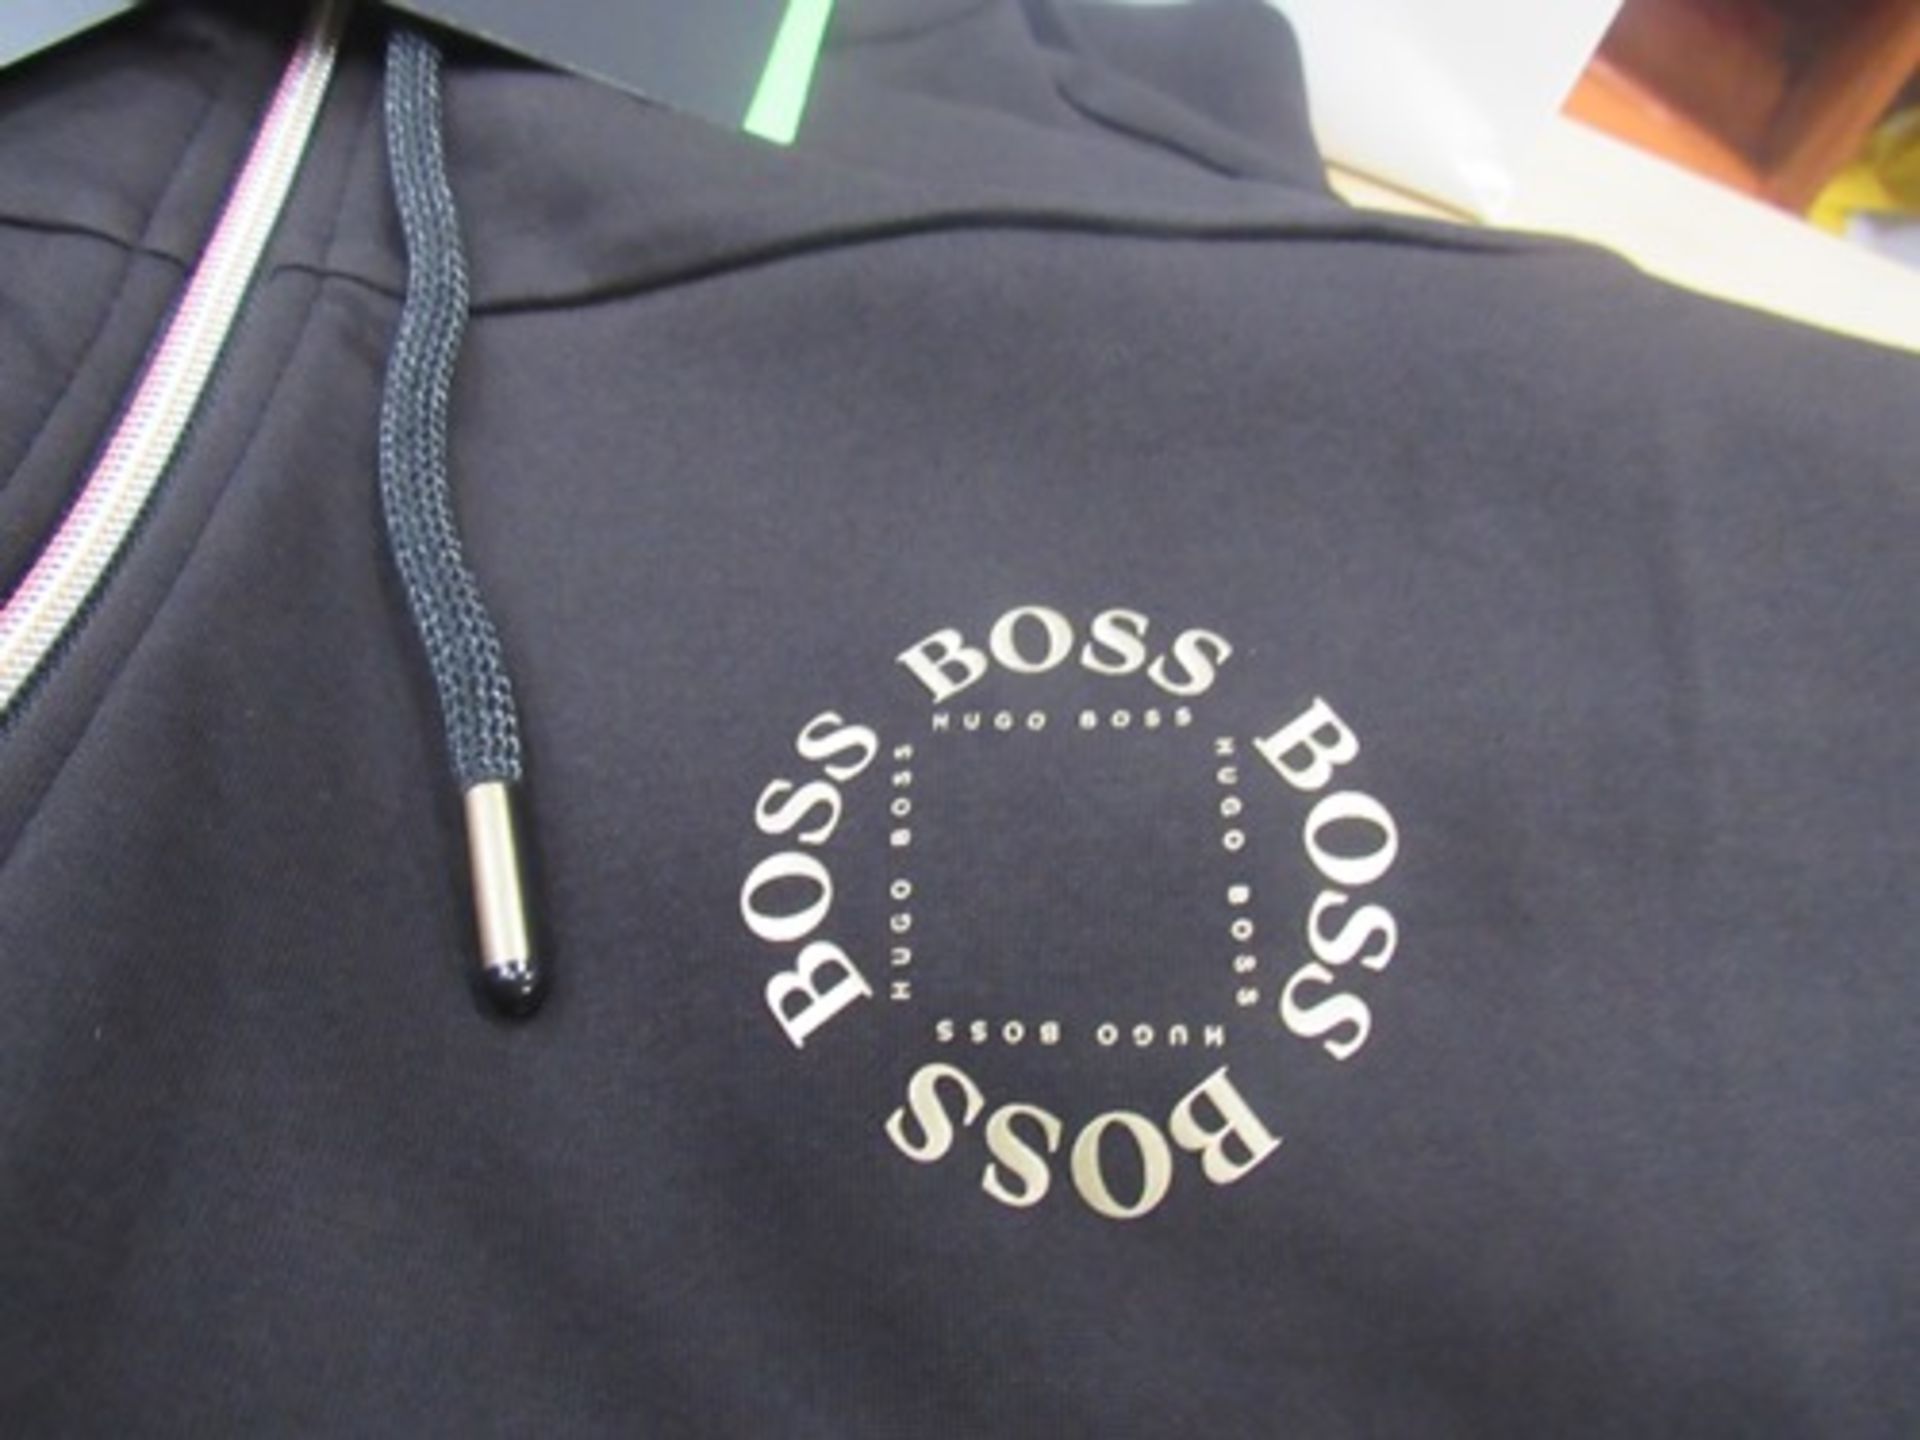 1 x Hugo Boss saggy circle hoody, size XL. RRP £119.00 - New with tags (box1) - Image 2 of 2